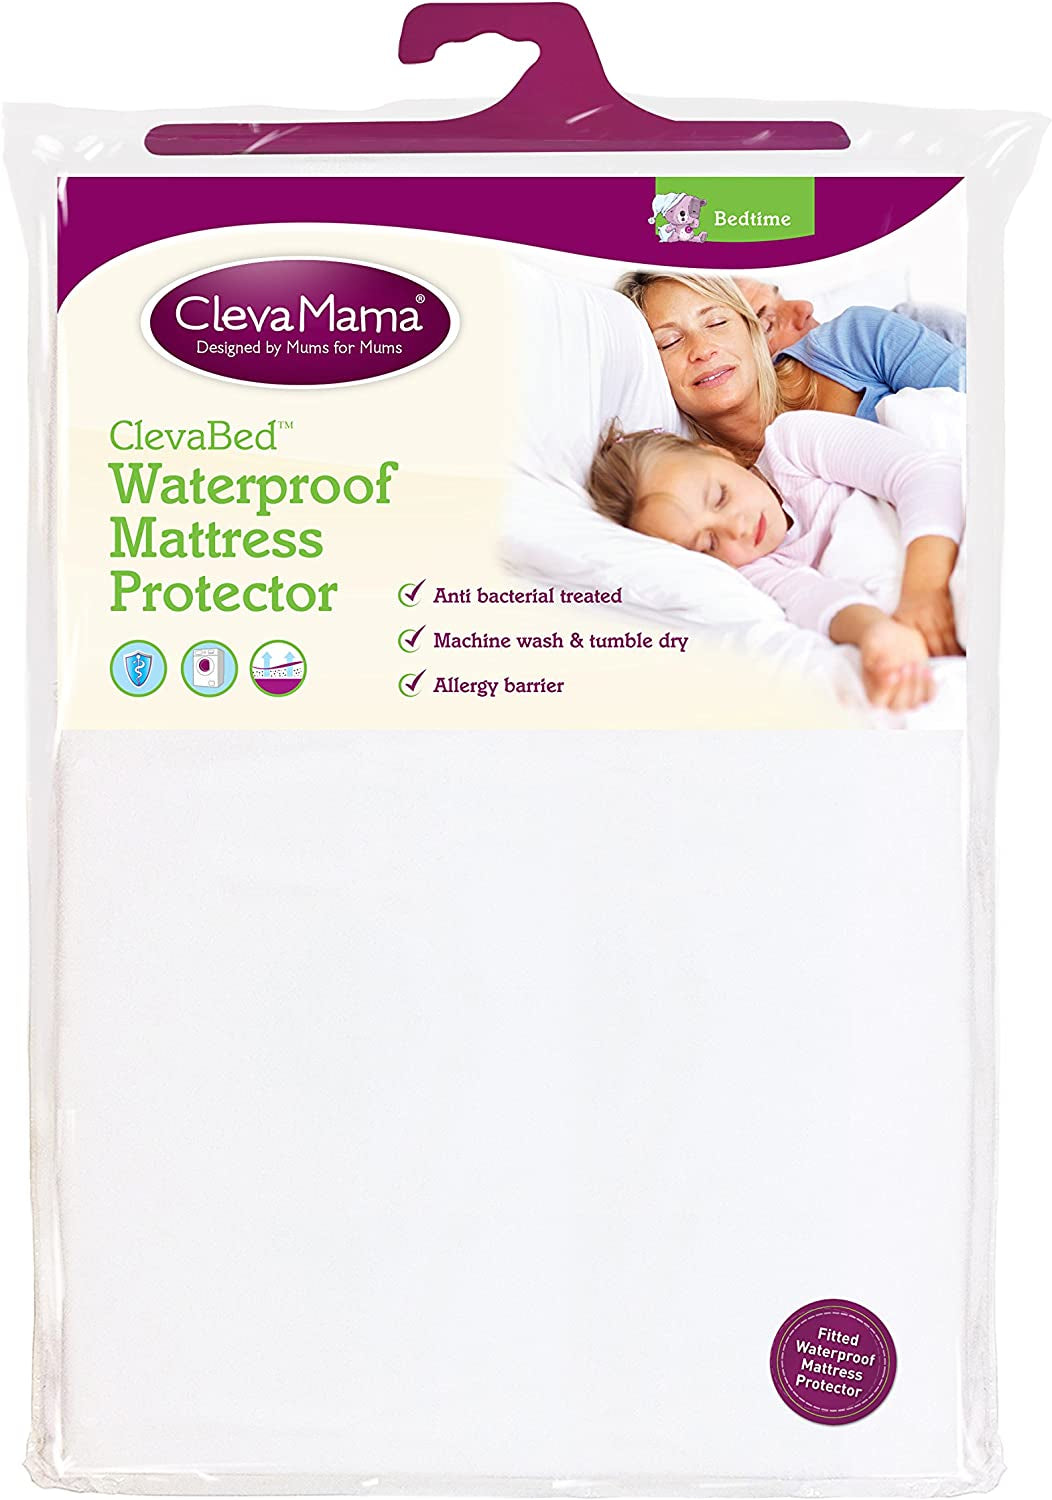 ClevaMama Waterproof Mattress Protector, Cotton Fitted Sheet for Baby Cot Bed - White - 60x120x15 cm